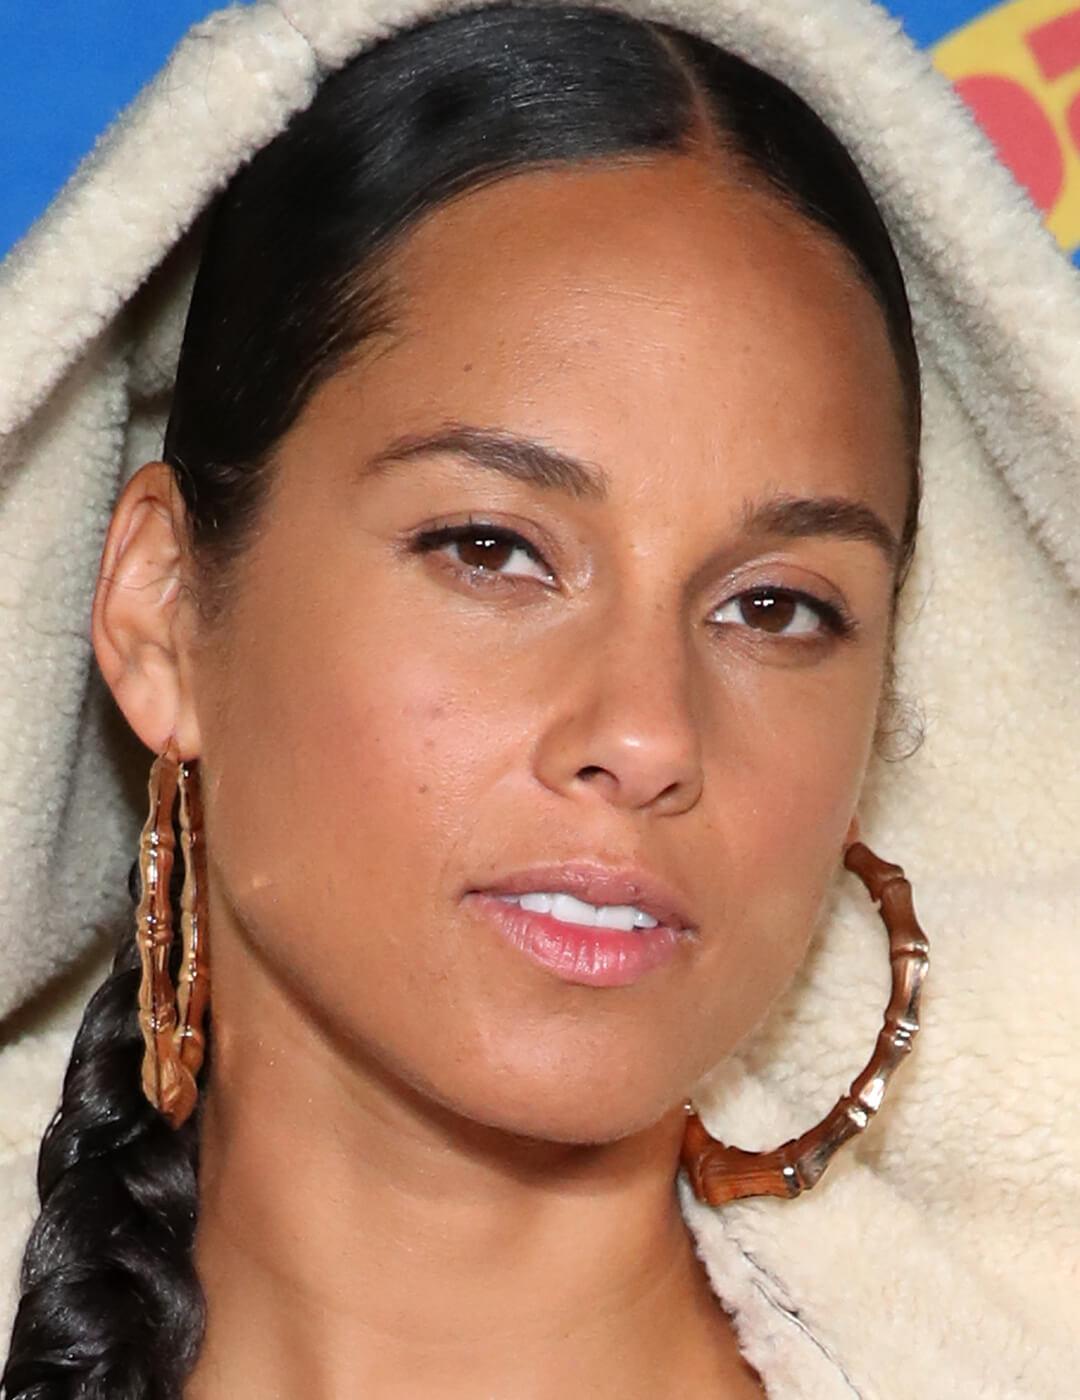 Close-up of Alicia Keys with a no-makeup makeup look and gold hoop earrings